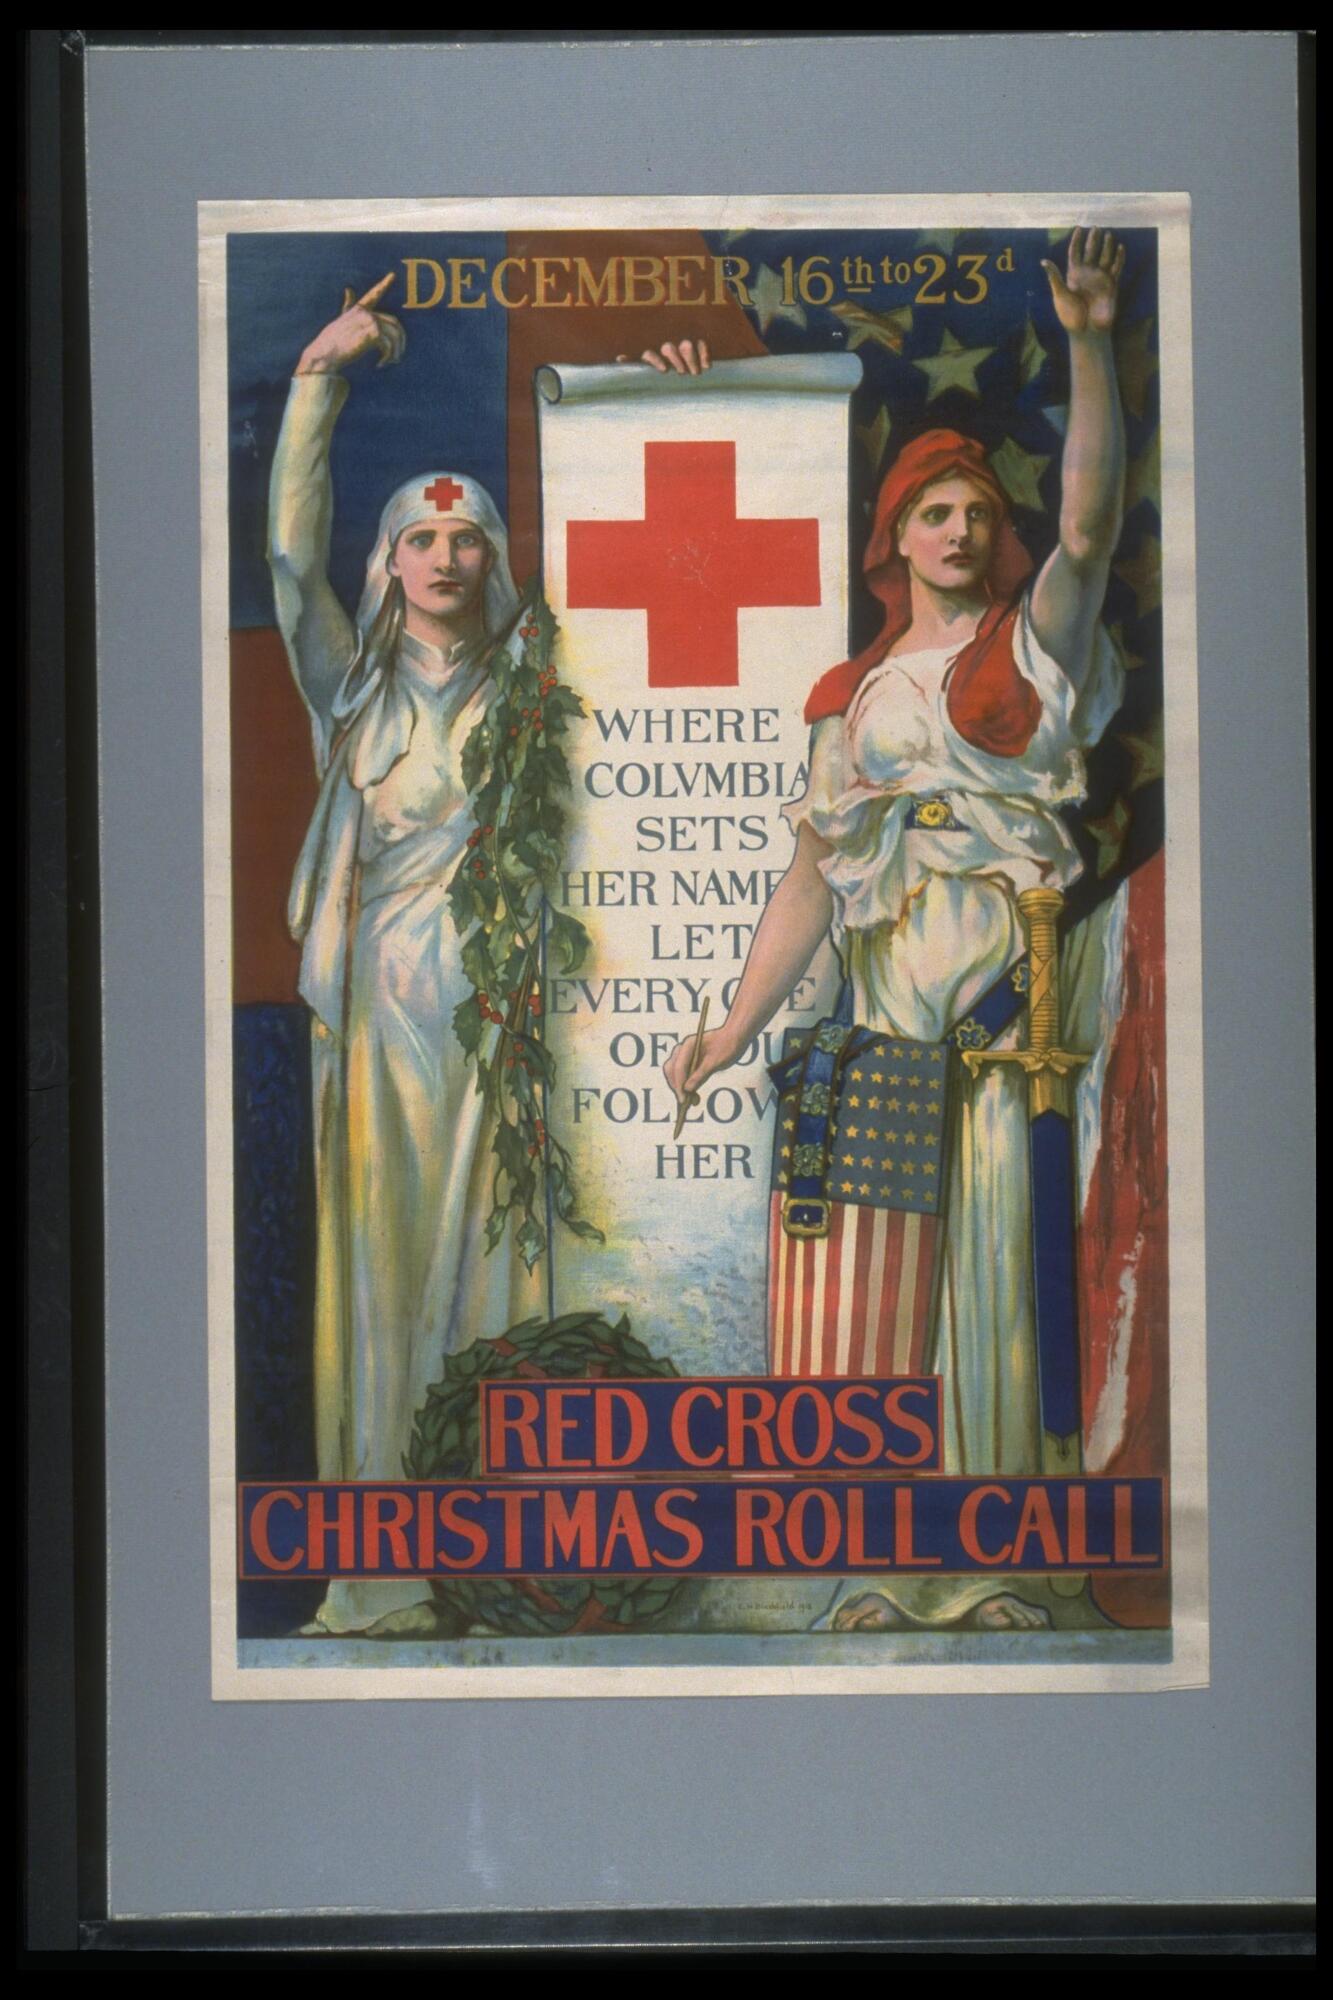 Text: December 16th to 23rd - Where Columbia Sets Her Name Ley Every One Of You Follow Her - Red Cross Christmas Roll Call